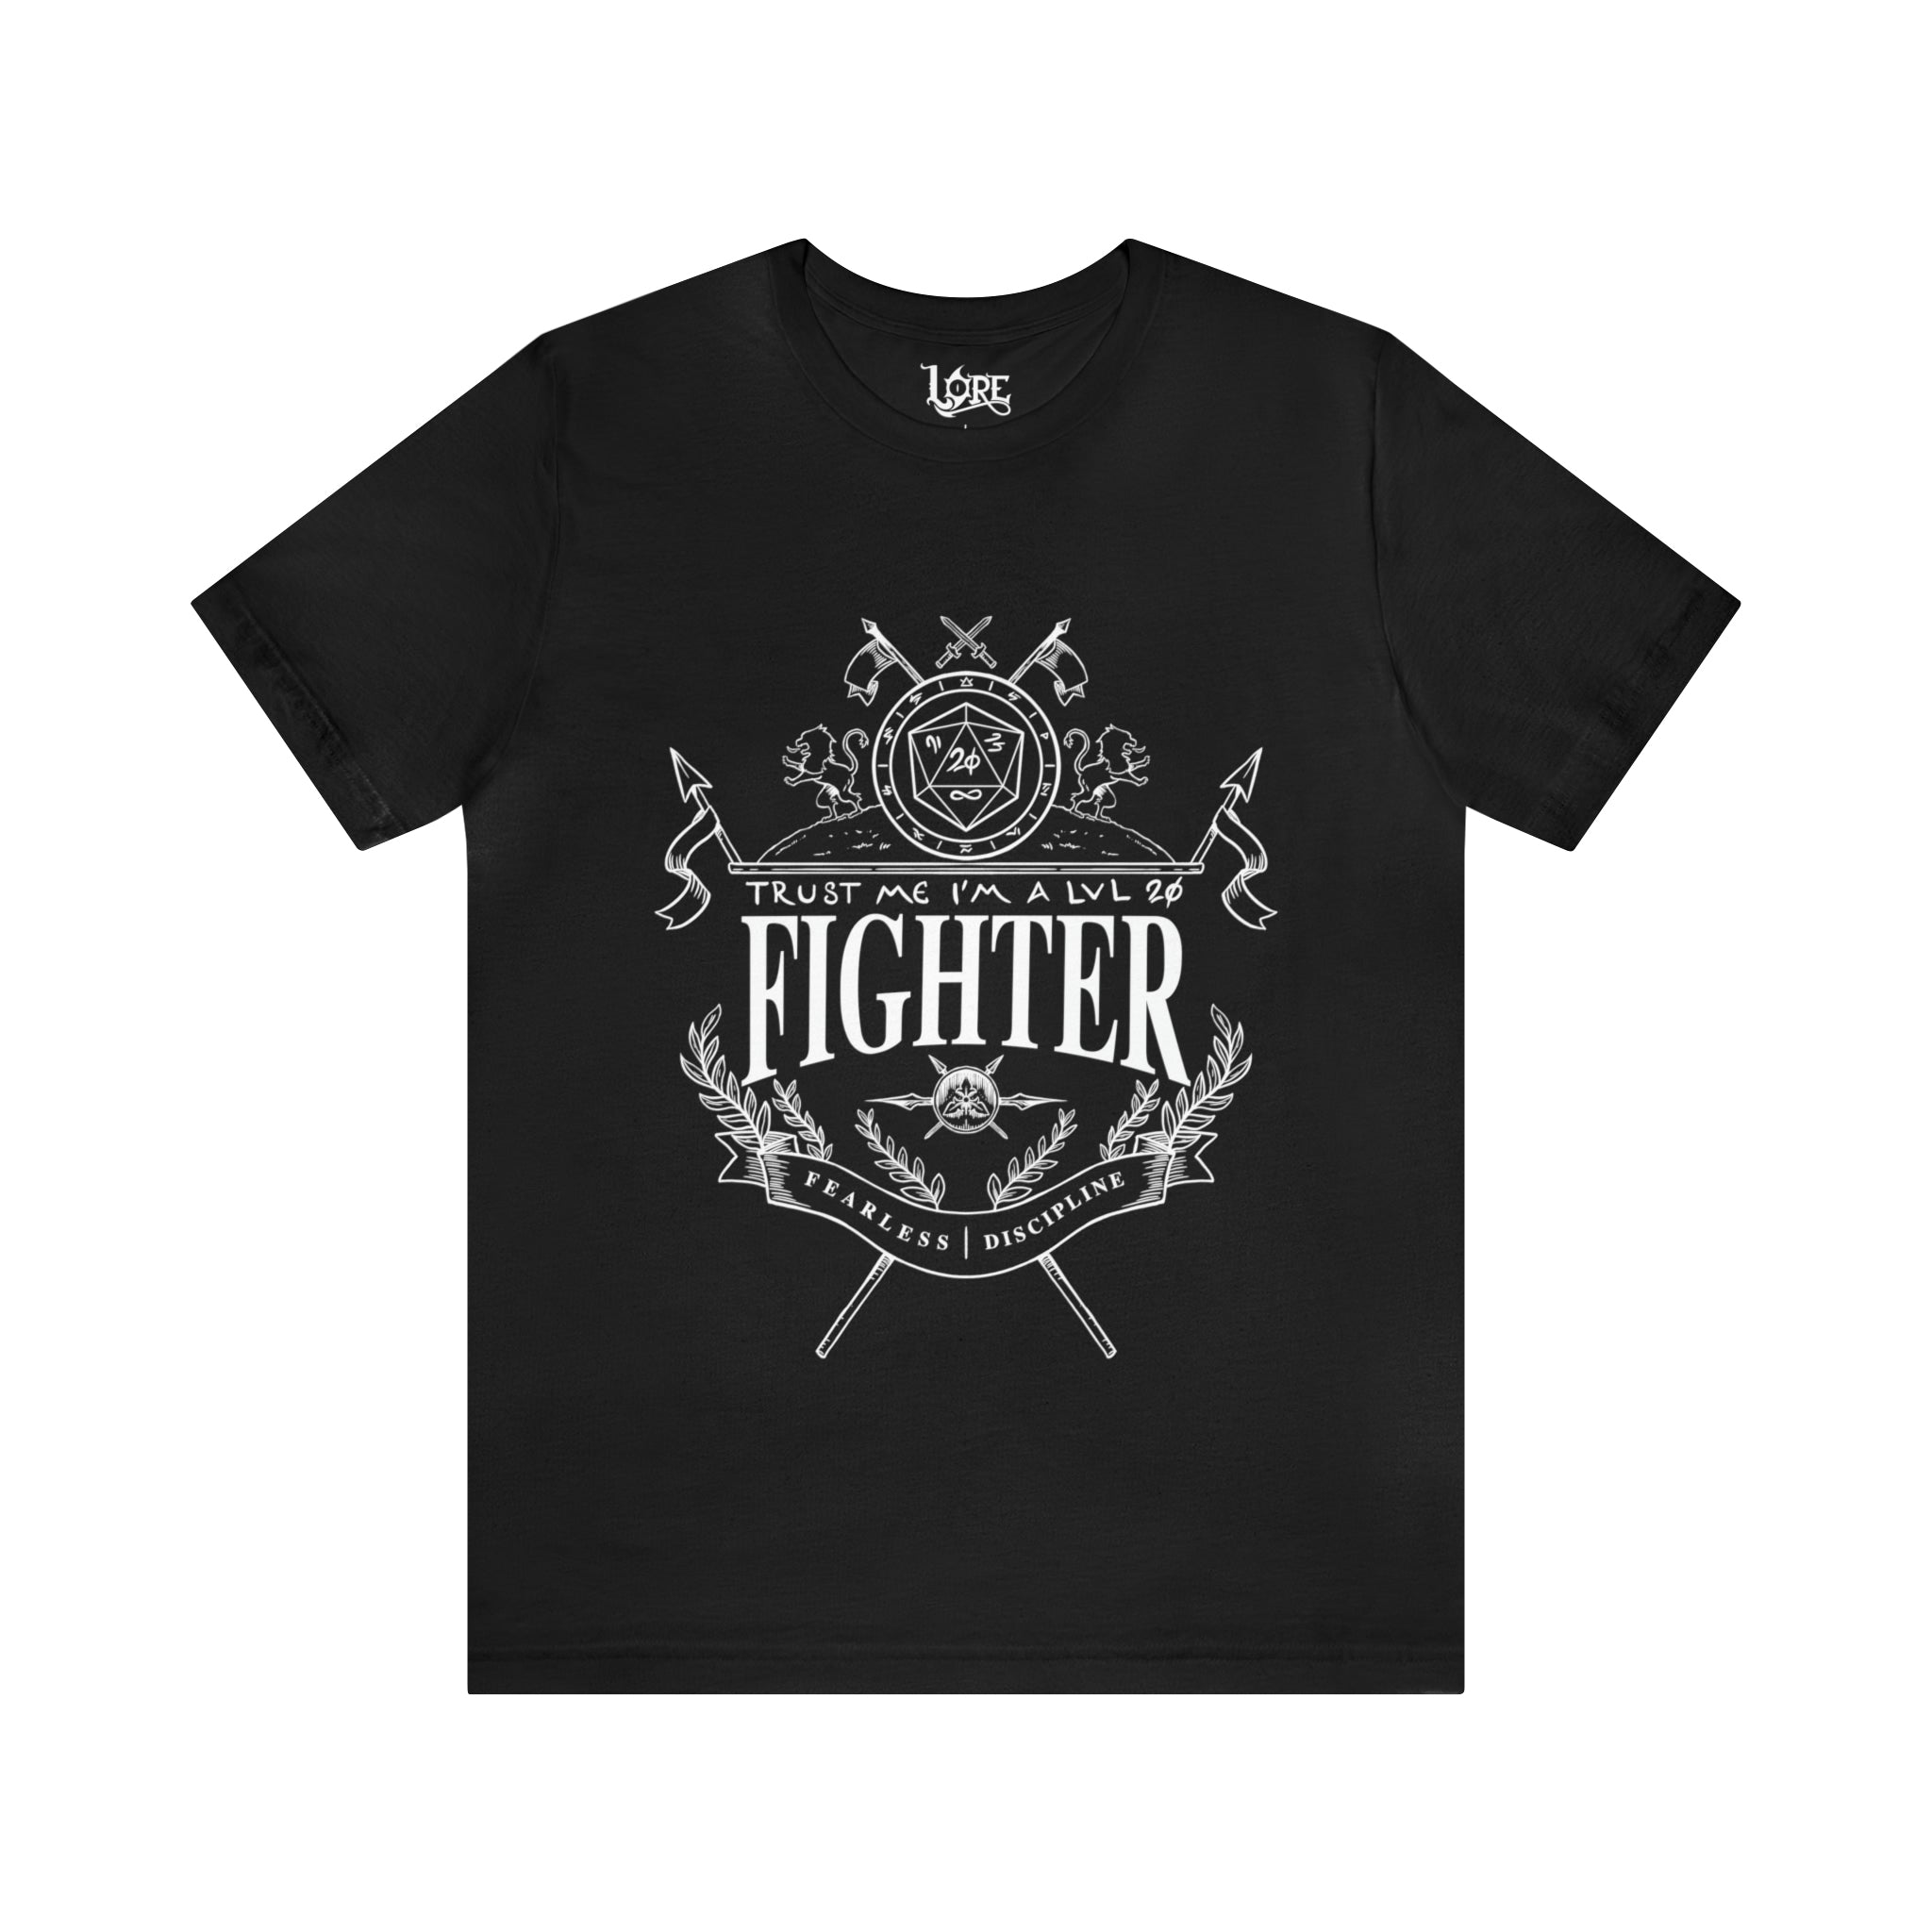 TRUST ME I'M A LEVEL 20 FIGHTER T-SHIRT